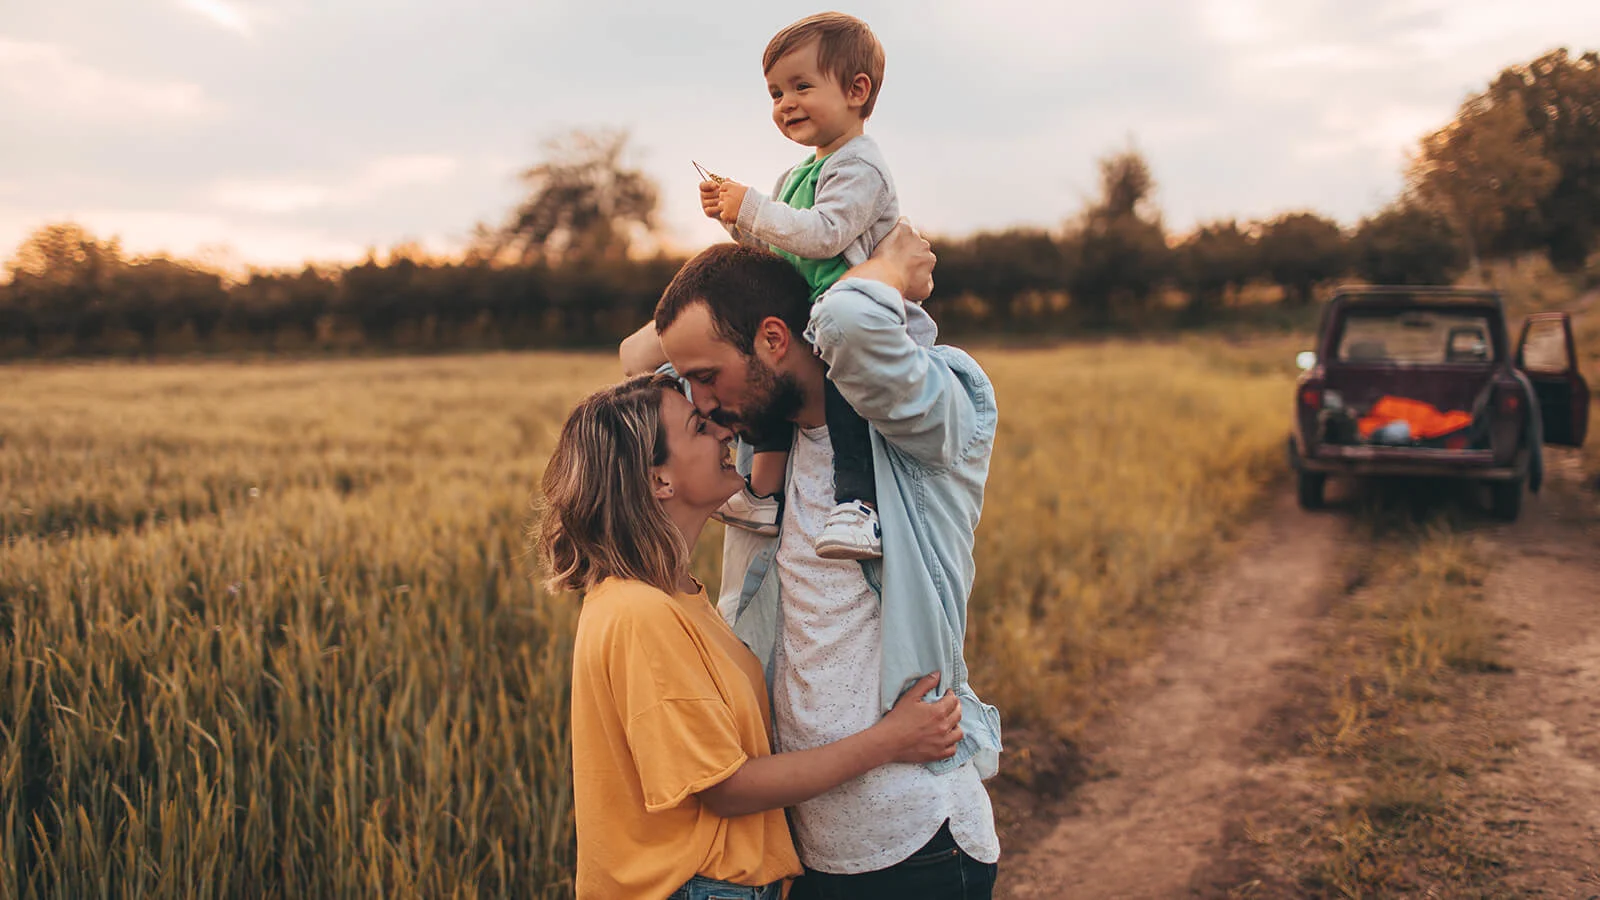 Prepared and Protected: How life insurance supports financial wellness for those you love - Young son on fathers shoulders while hugging the mother